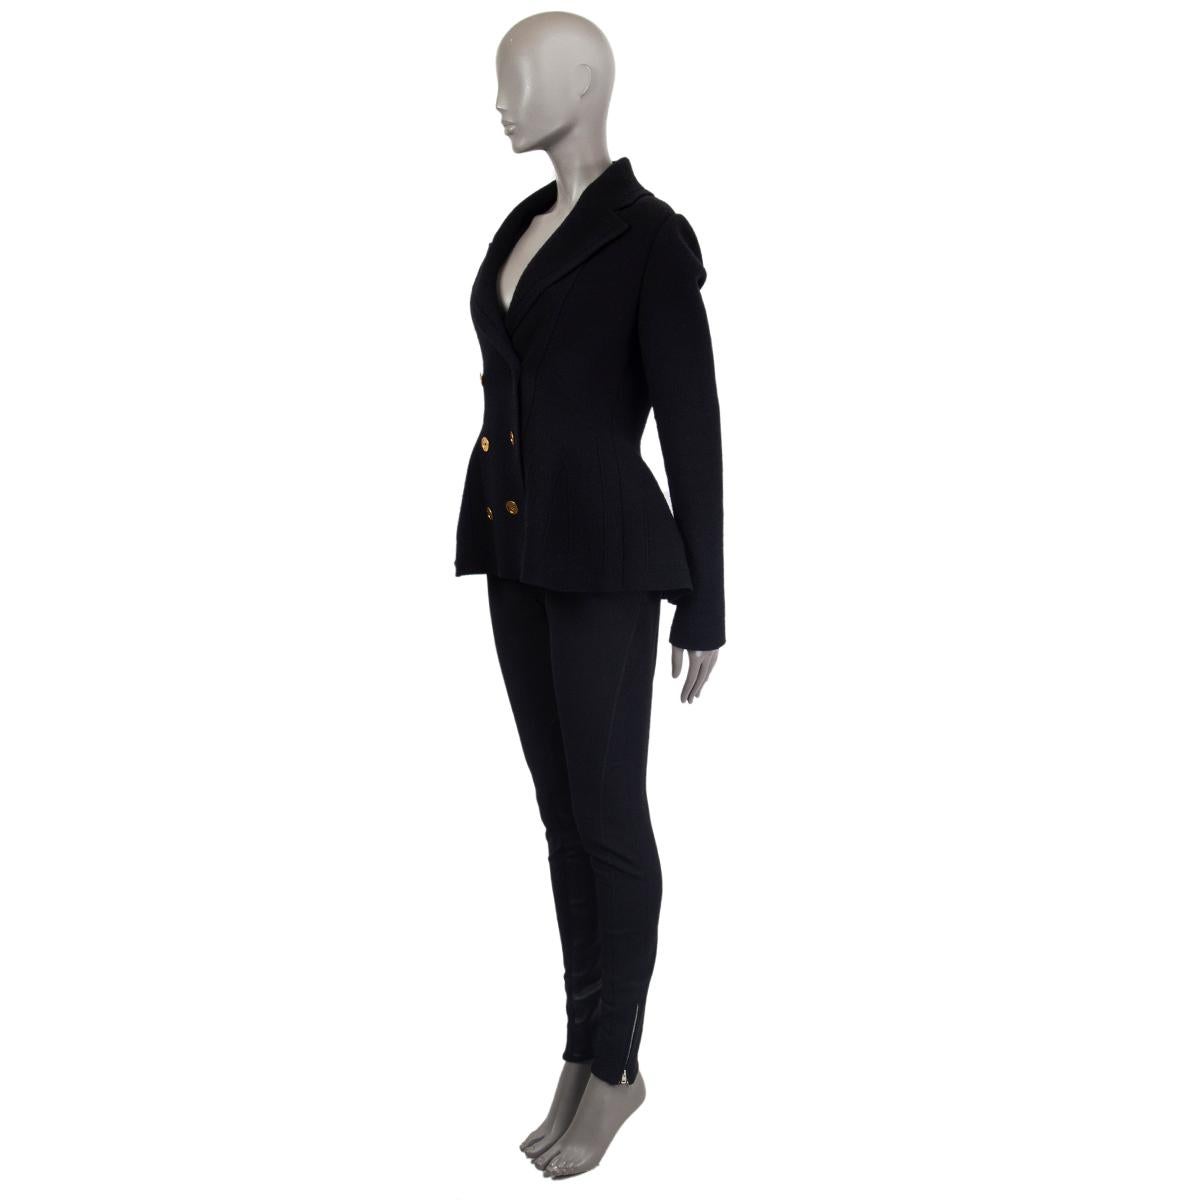 Alexander McQueen double-breasted peplum blazer in black wool (78%), cashmere (20%), nylon (1%) and elastane (1%).  Has antique gold-tone buttons. Unlined. Has been worn and is in excellent condition.

Tag Size M
Size M
Shoulder Width 39cm